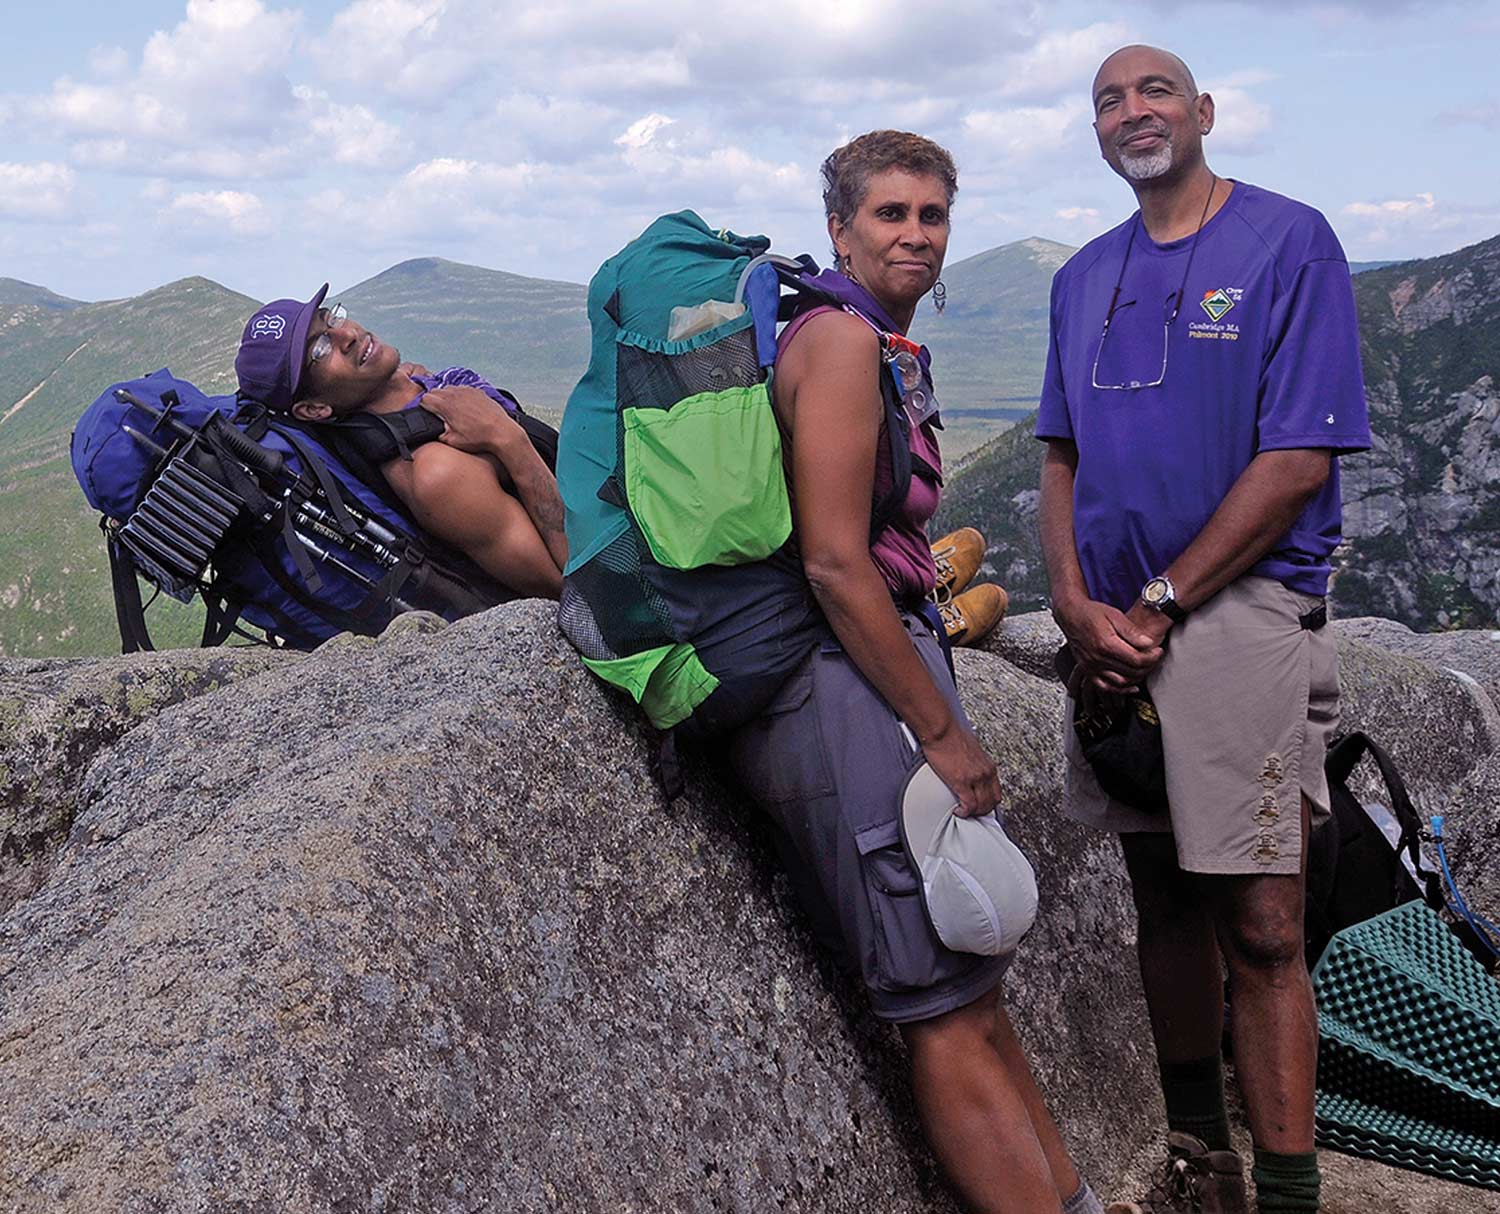 Derrick, Michelle, and their son, Tano, ascend the A.T. on Katahdin